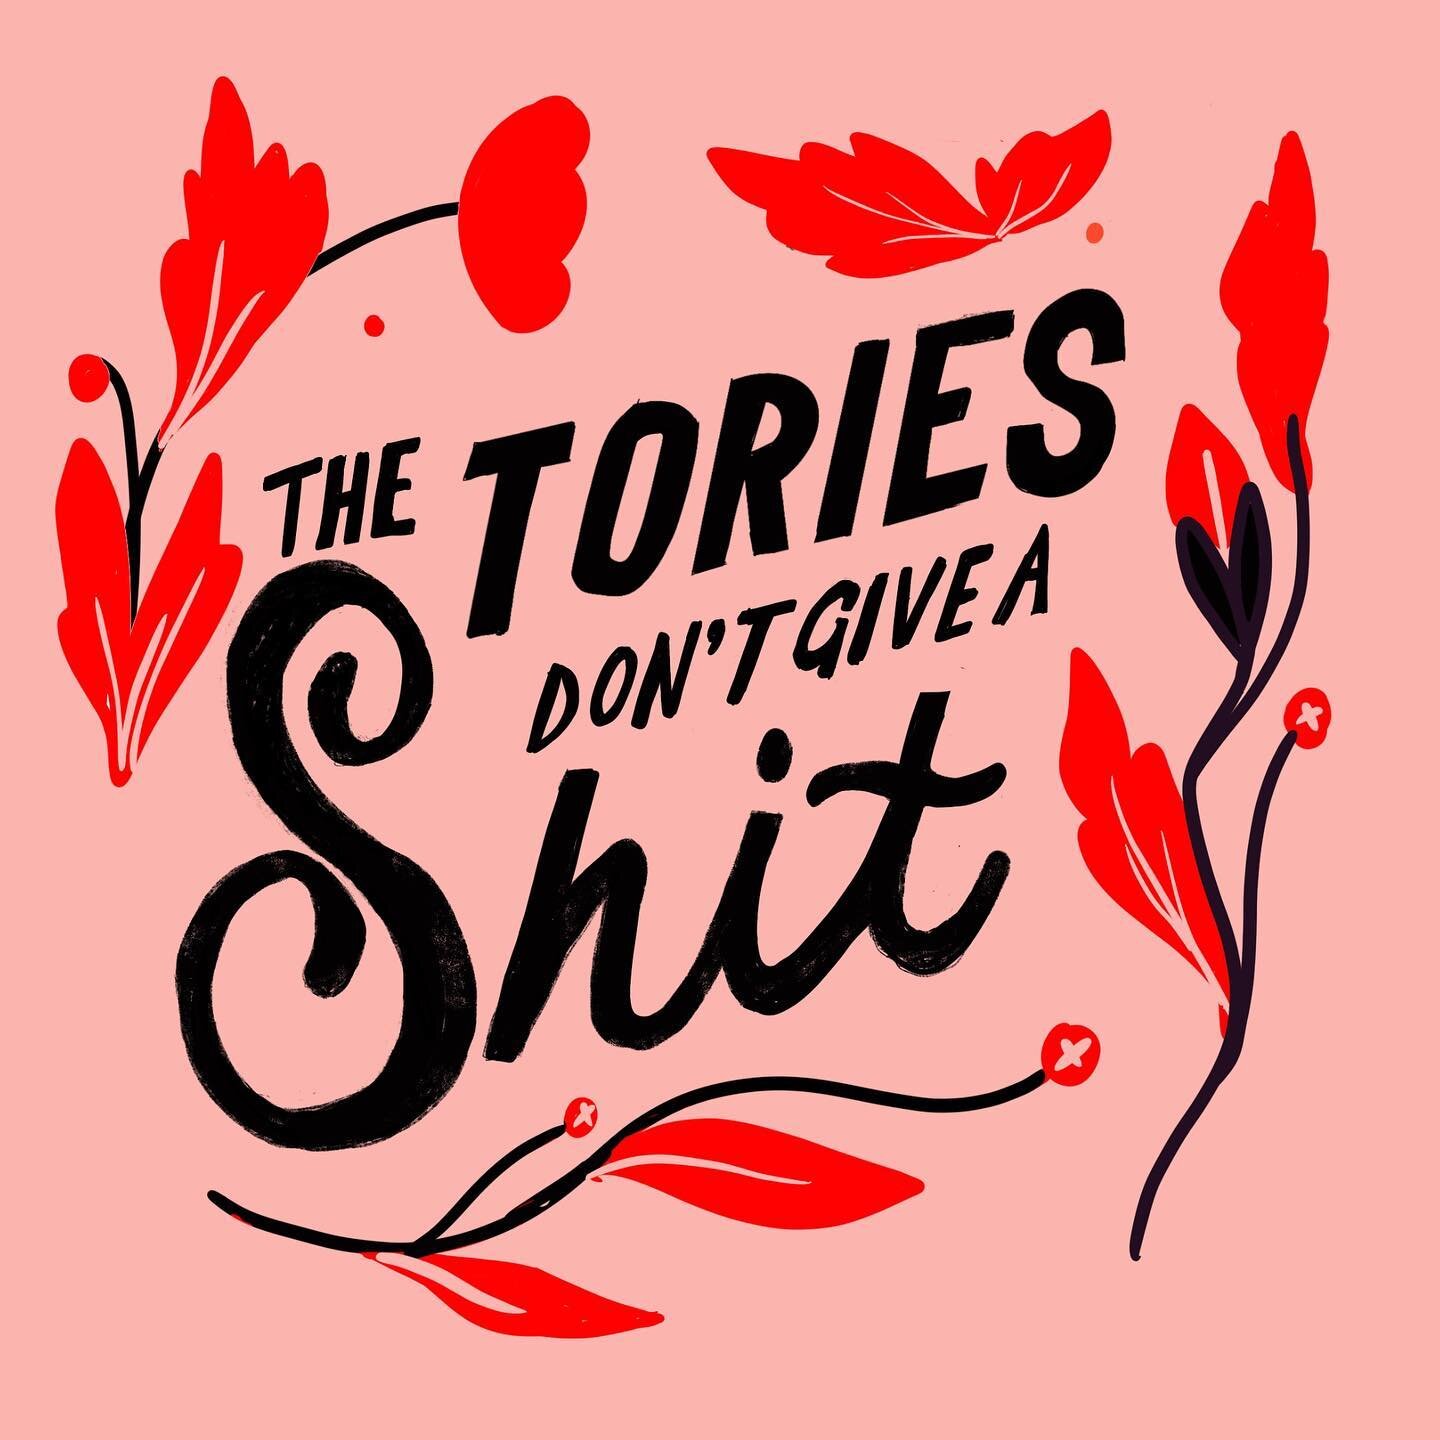 The Tories don&rsquo;t give a shit.✨
&bull;
They don&rsquo;t give a shit about hungry children, the environment, racism, transphobia, the creative arts industry, our NHS and the fact that 80,000 people have died from COVID ( the fourth largest in the